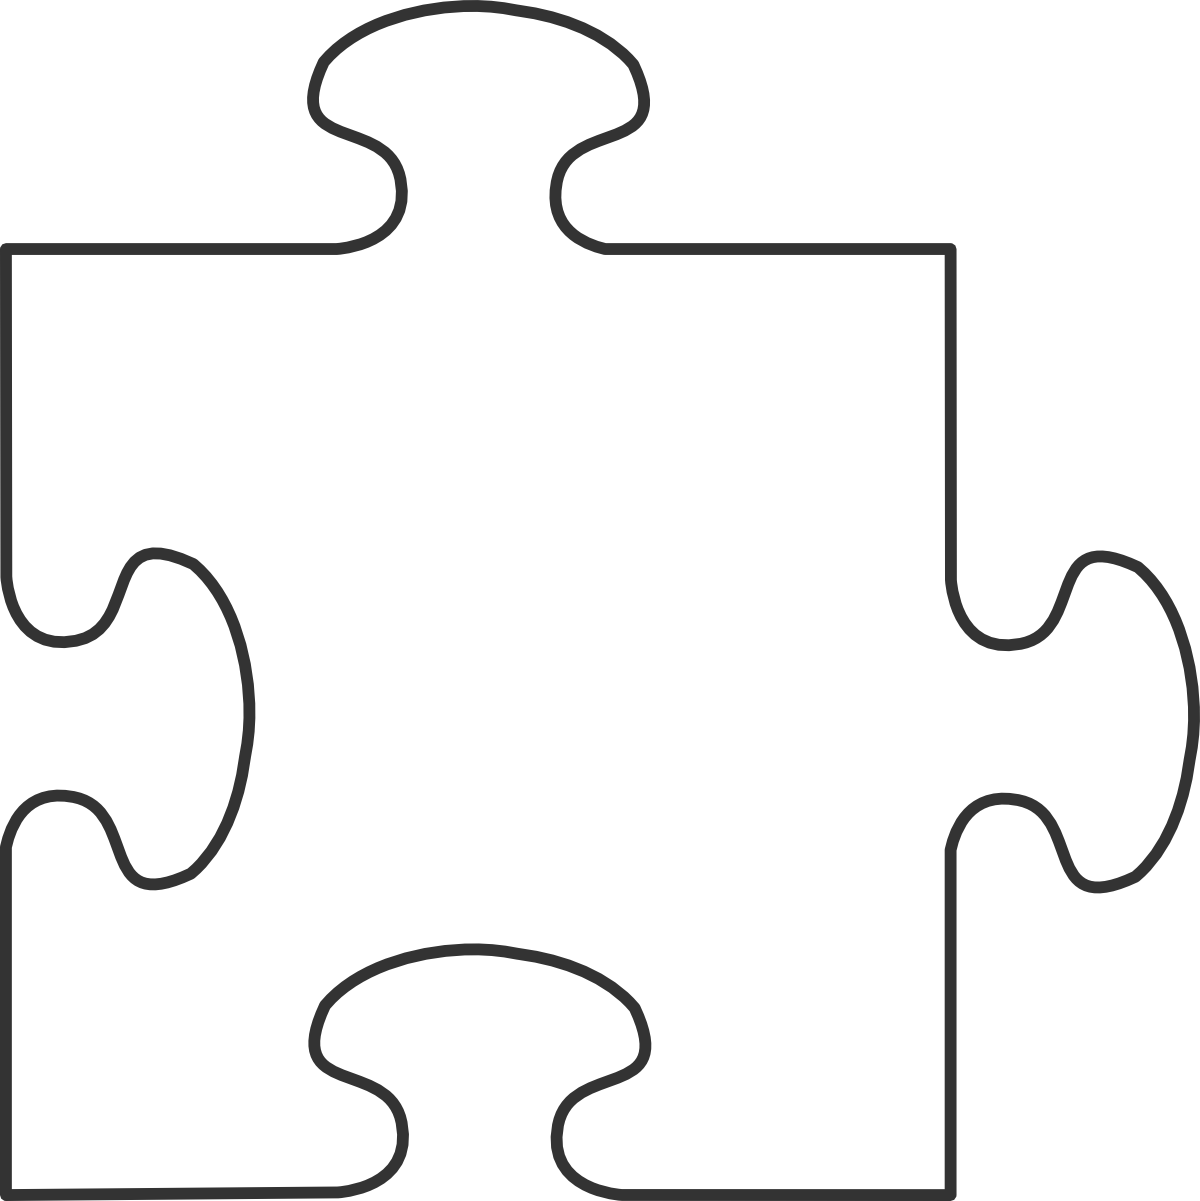 6 piece blank puzzle template separate pieces